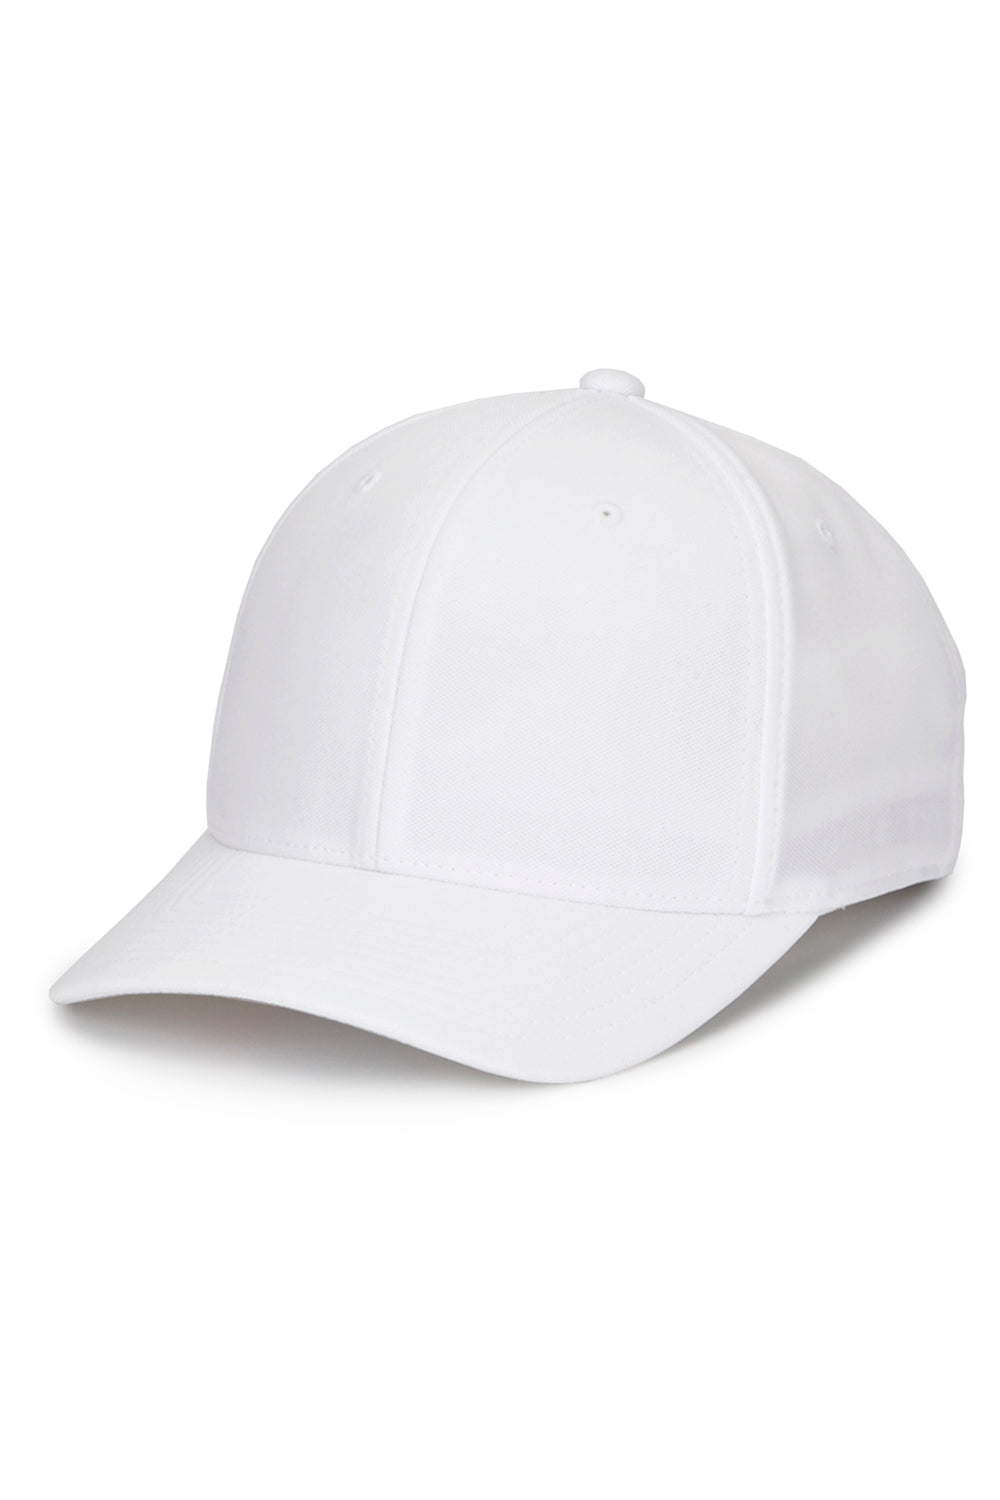 Flexfit 110P Mens Cool & Dry Moisture Wicking Adjustable Hat White Front